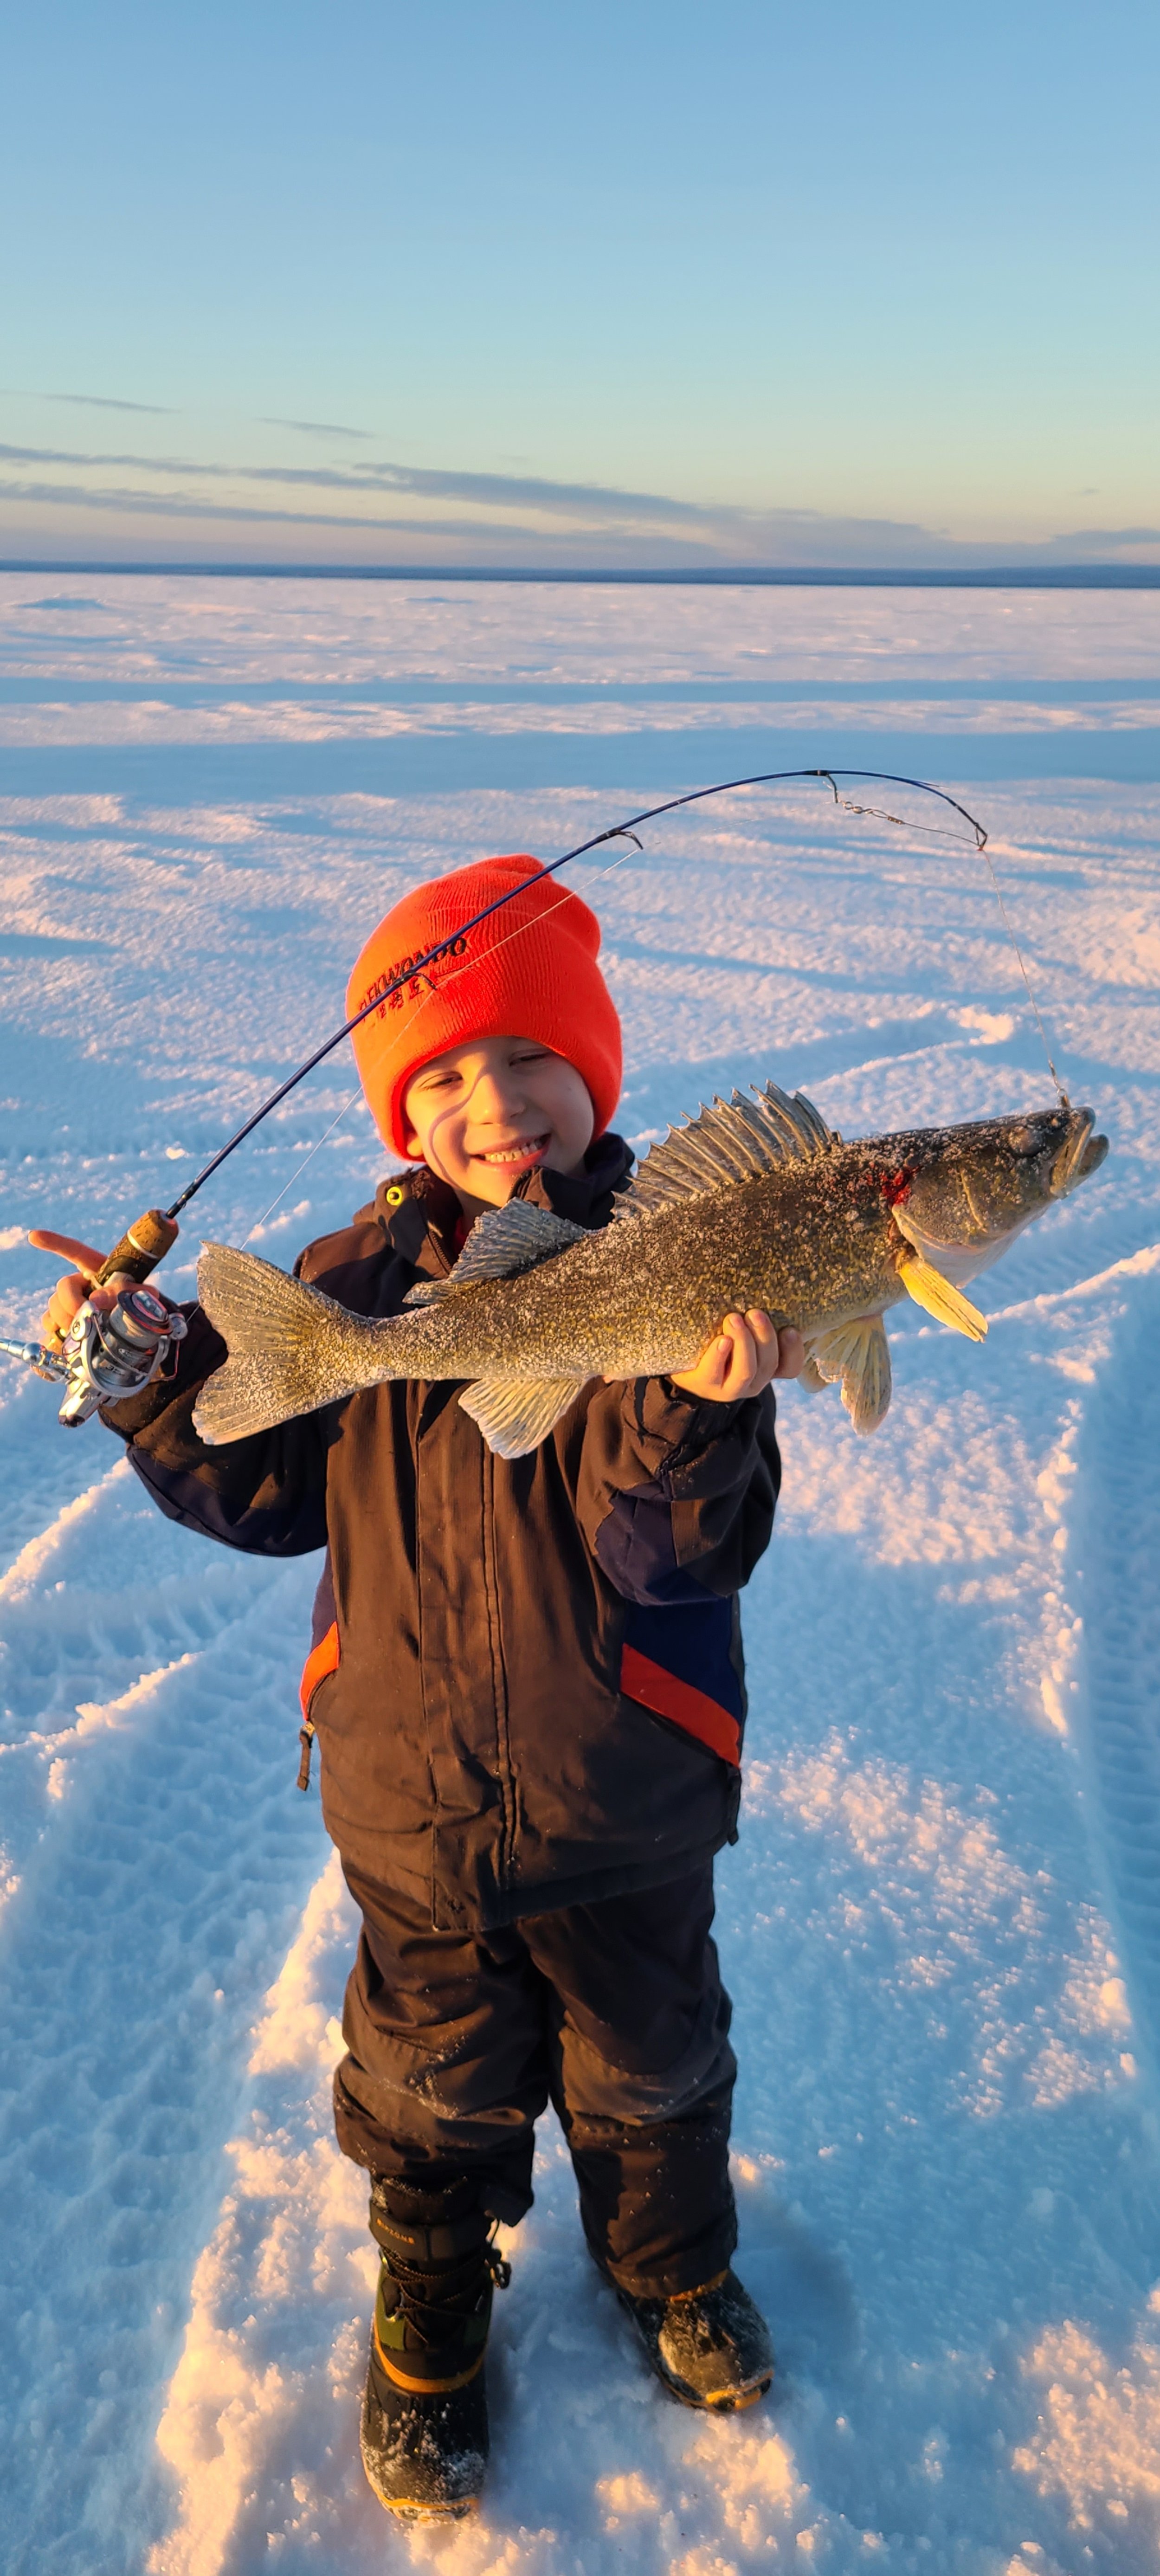 Discover Canada's Finest: The Top 10 Walleye Ice Fishing Lakes